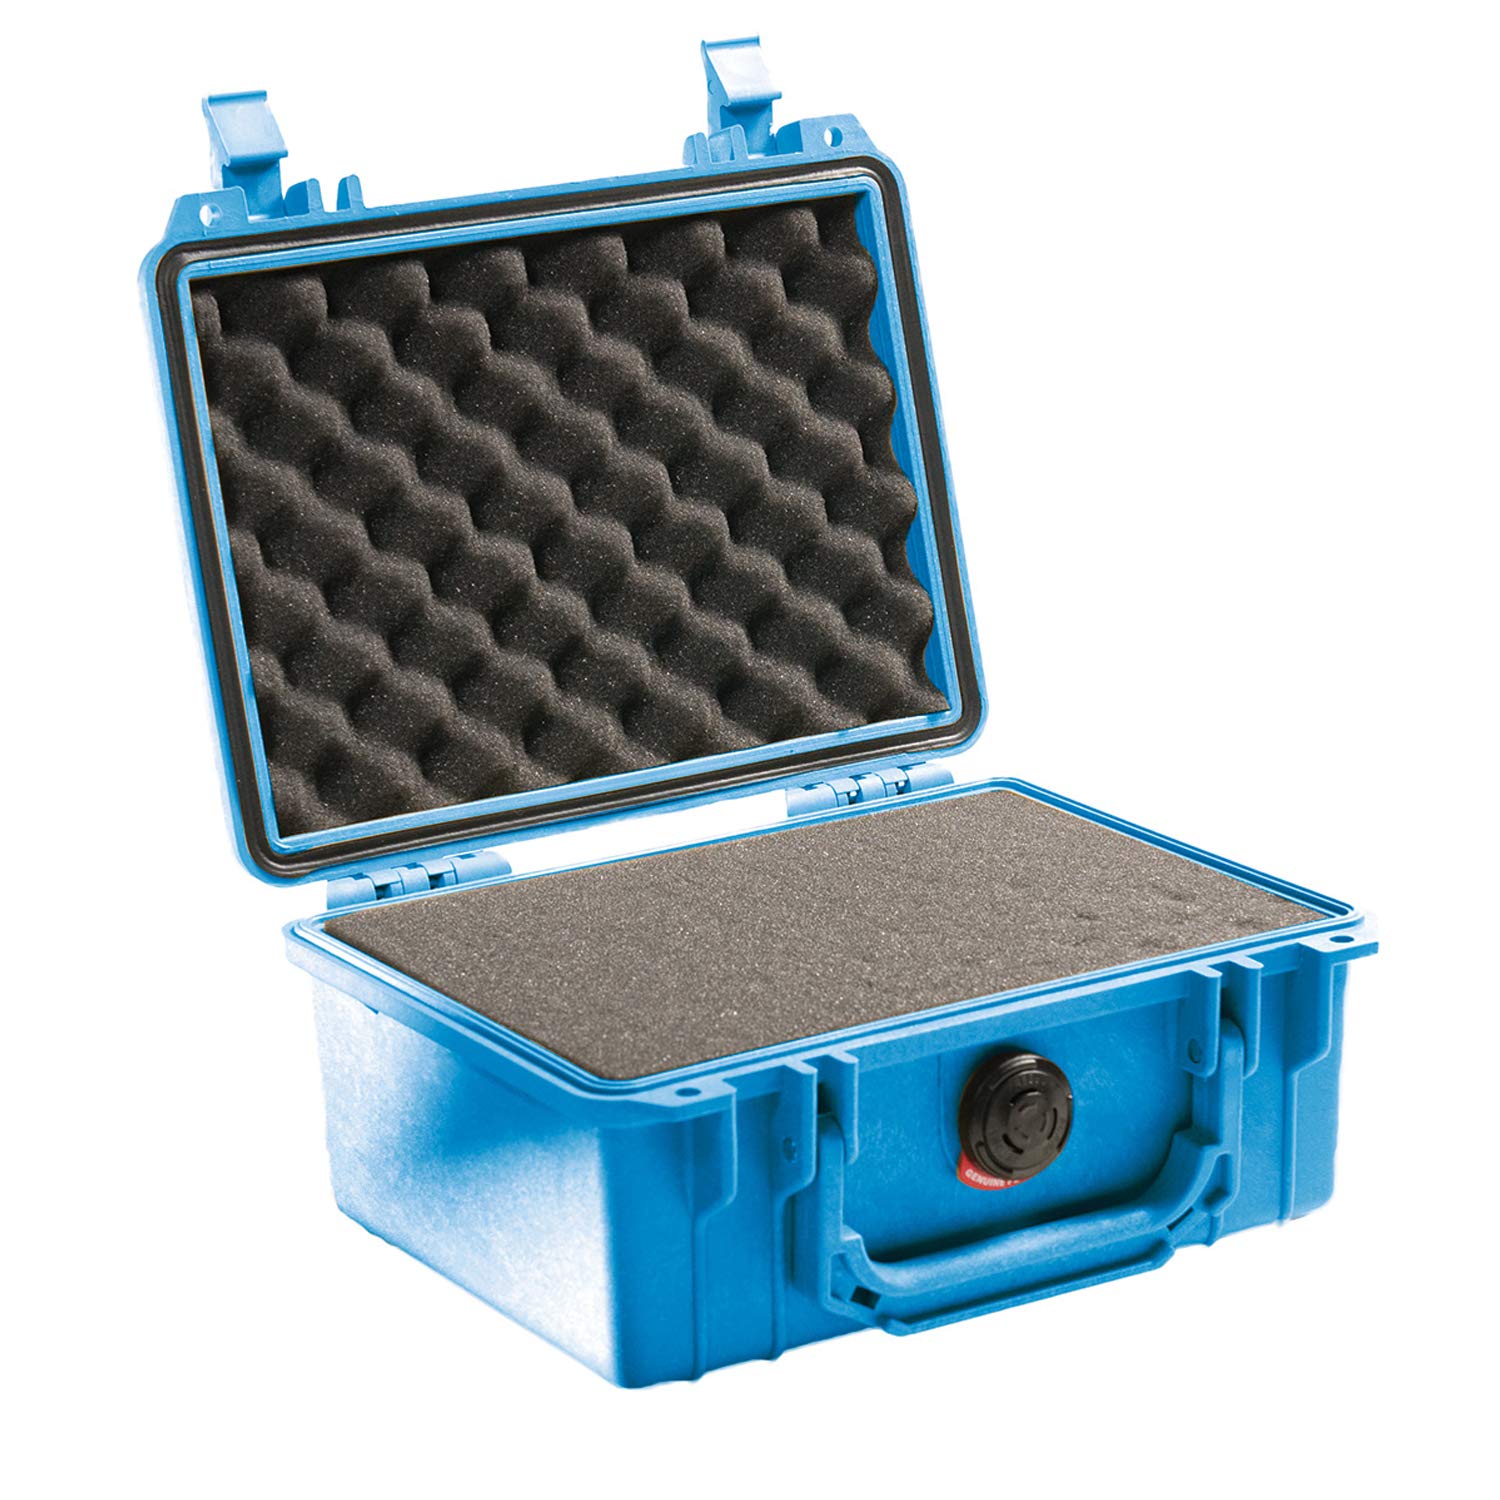 Pelican Products 1150-000-110Pelican 1150 Camera Case with Foam (Black) & 1150 Camera Case with Foam (Blue)